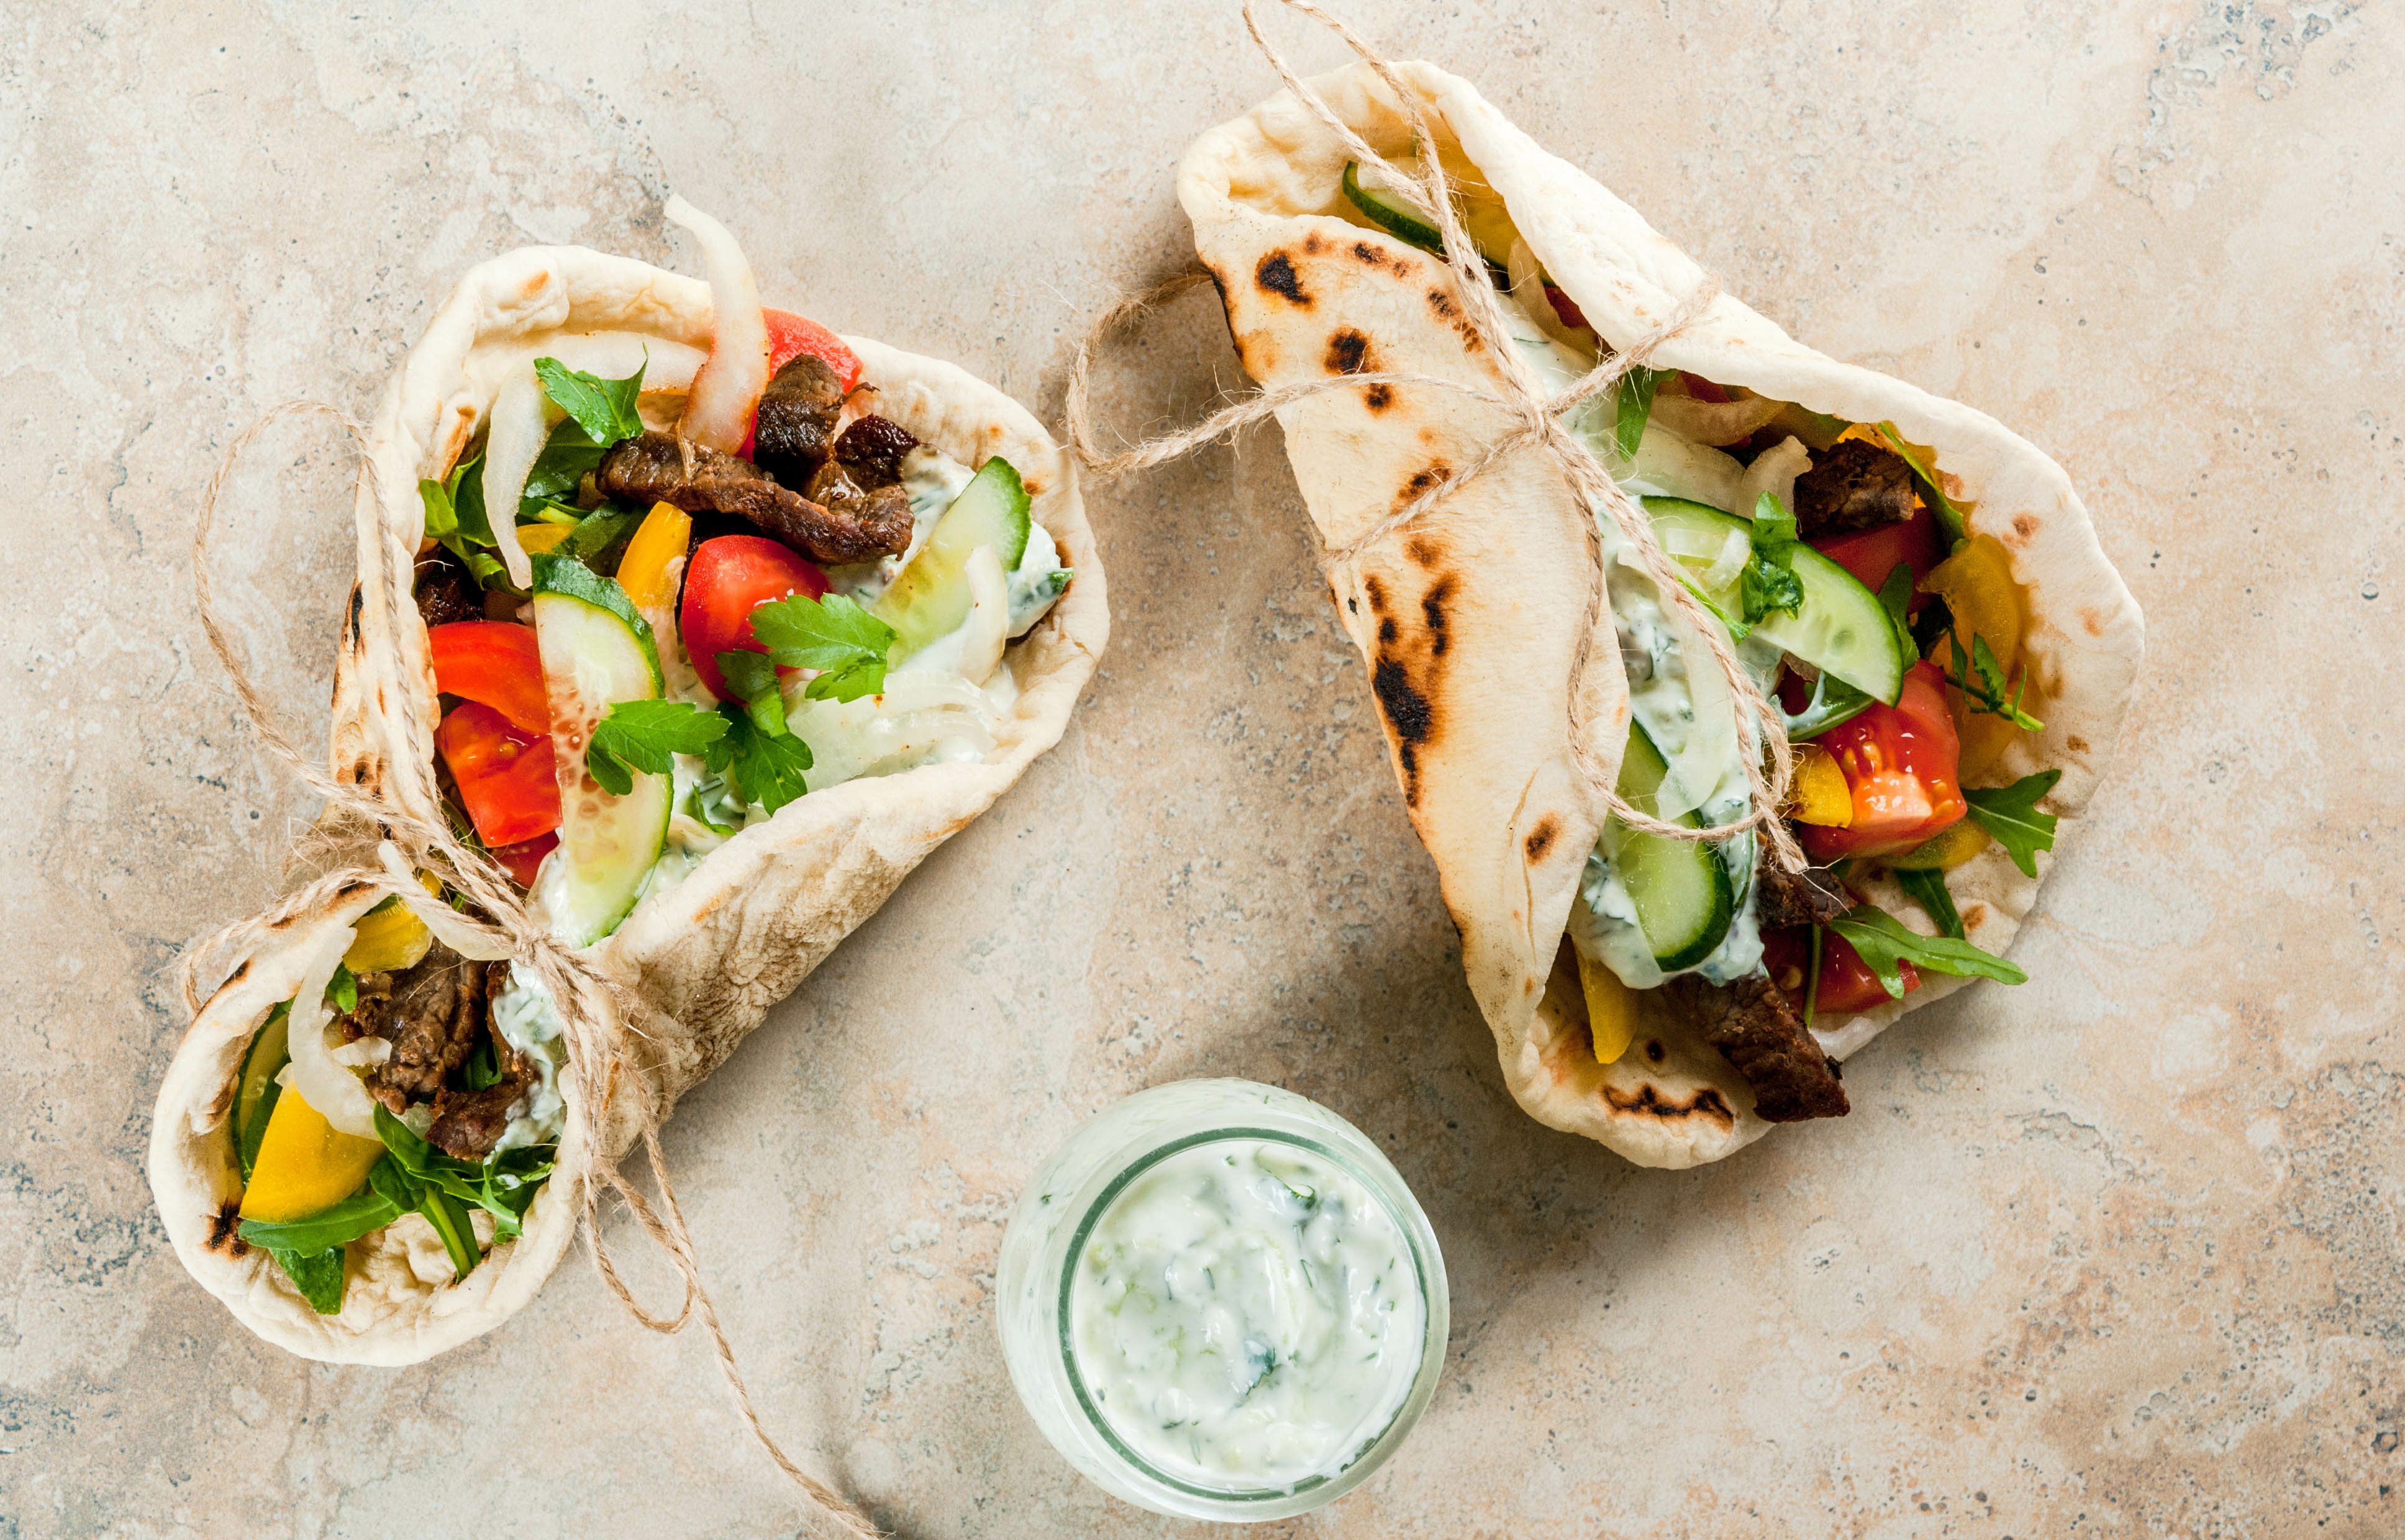 Healthy snack, lunch. Traditional Greek wrapped sandwich gyros - tortillas, bread pita with a filling of vegetables, beef meat and sauce tzatziki. On light stone table Copy space top view, Healthy snack, lunch. Traditional Greek wrapped sandwich gyros -